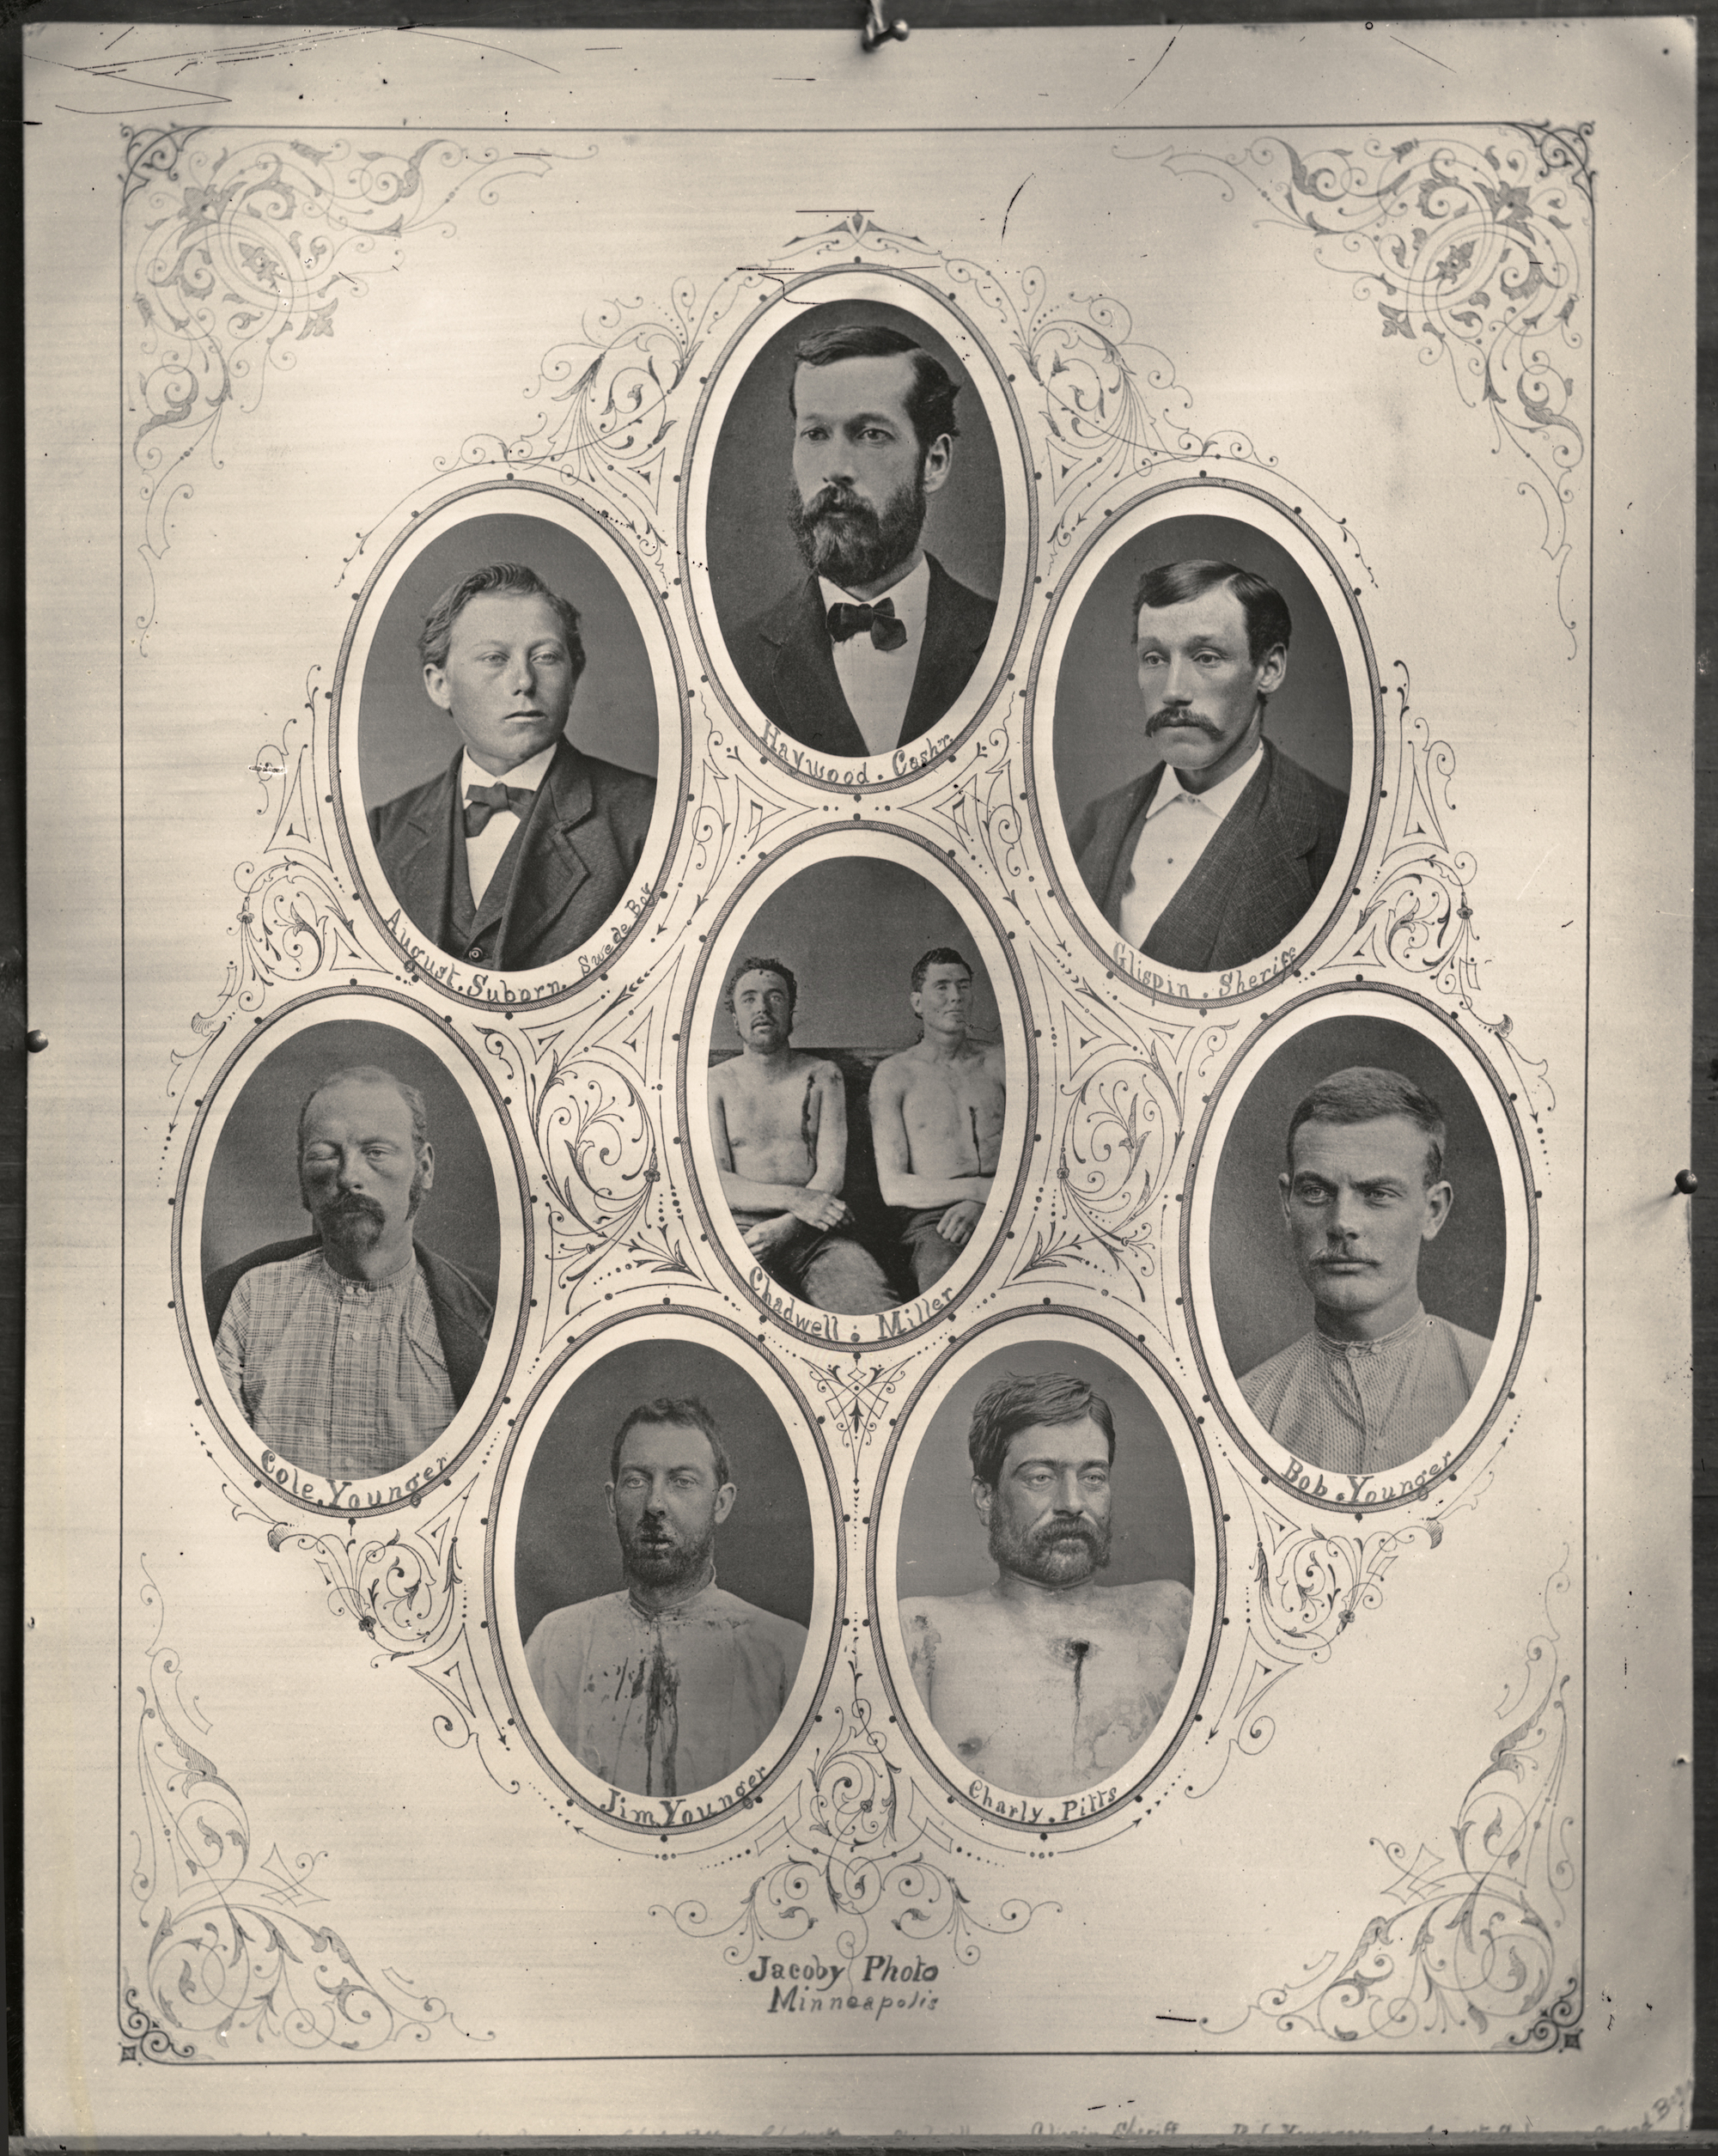 A collage of Minnesota citizens and James-Younger Gang members